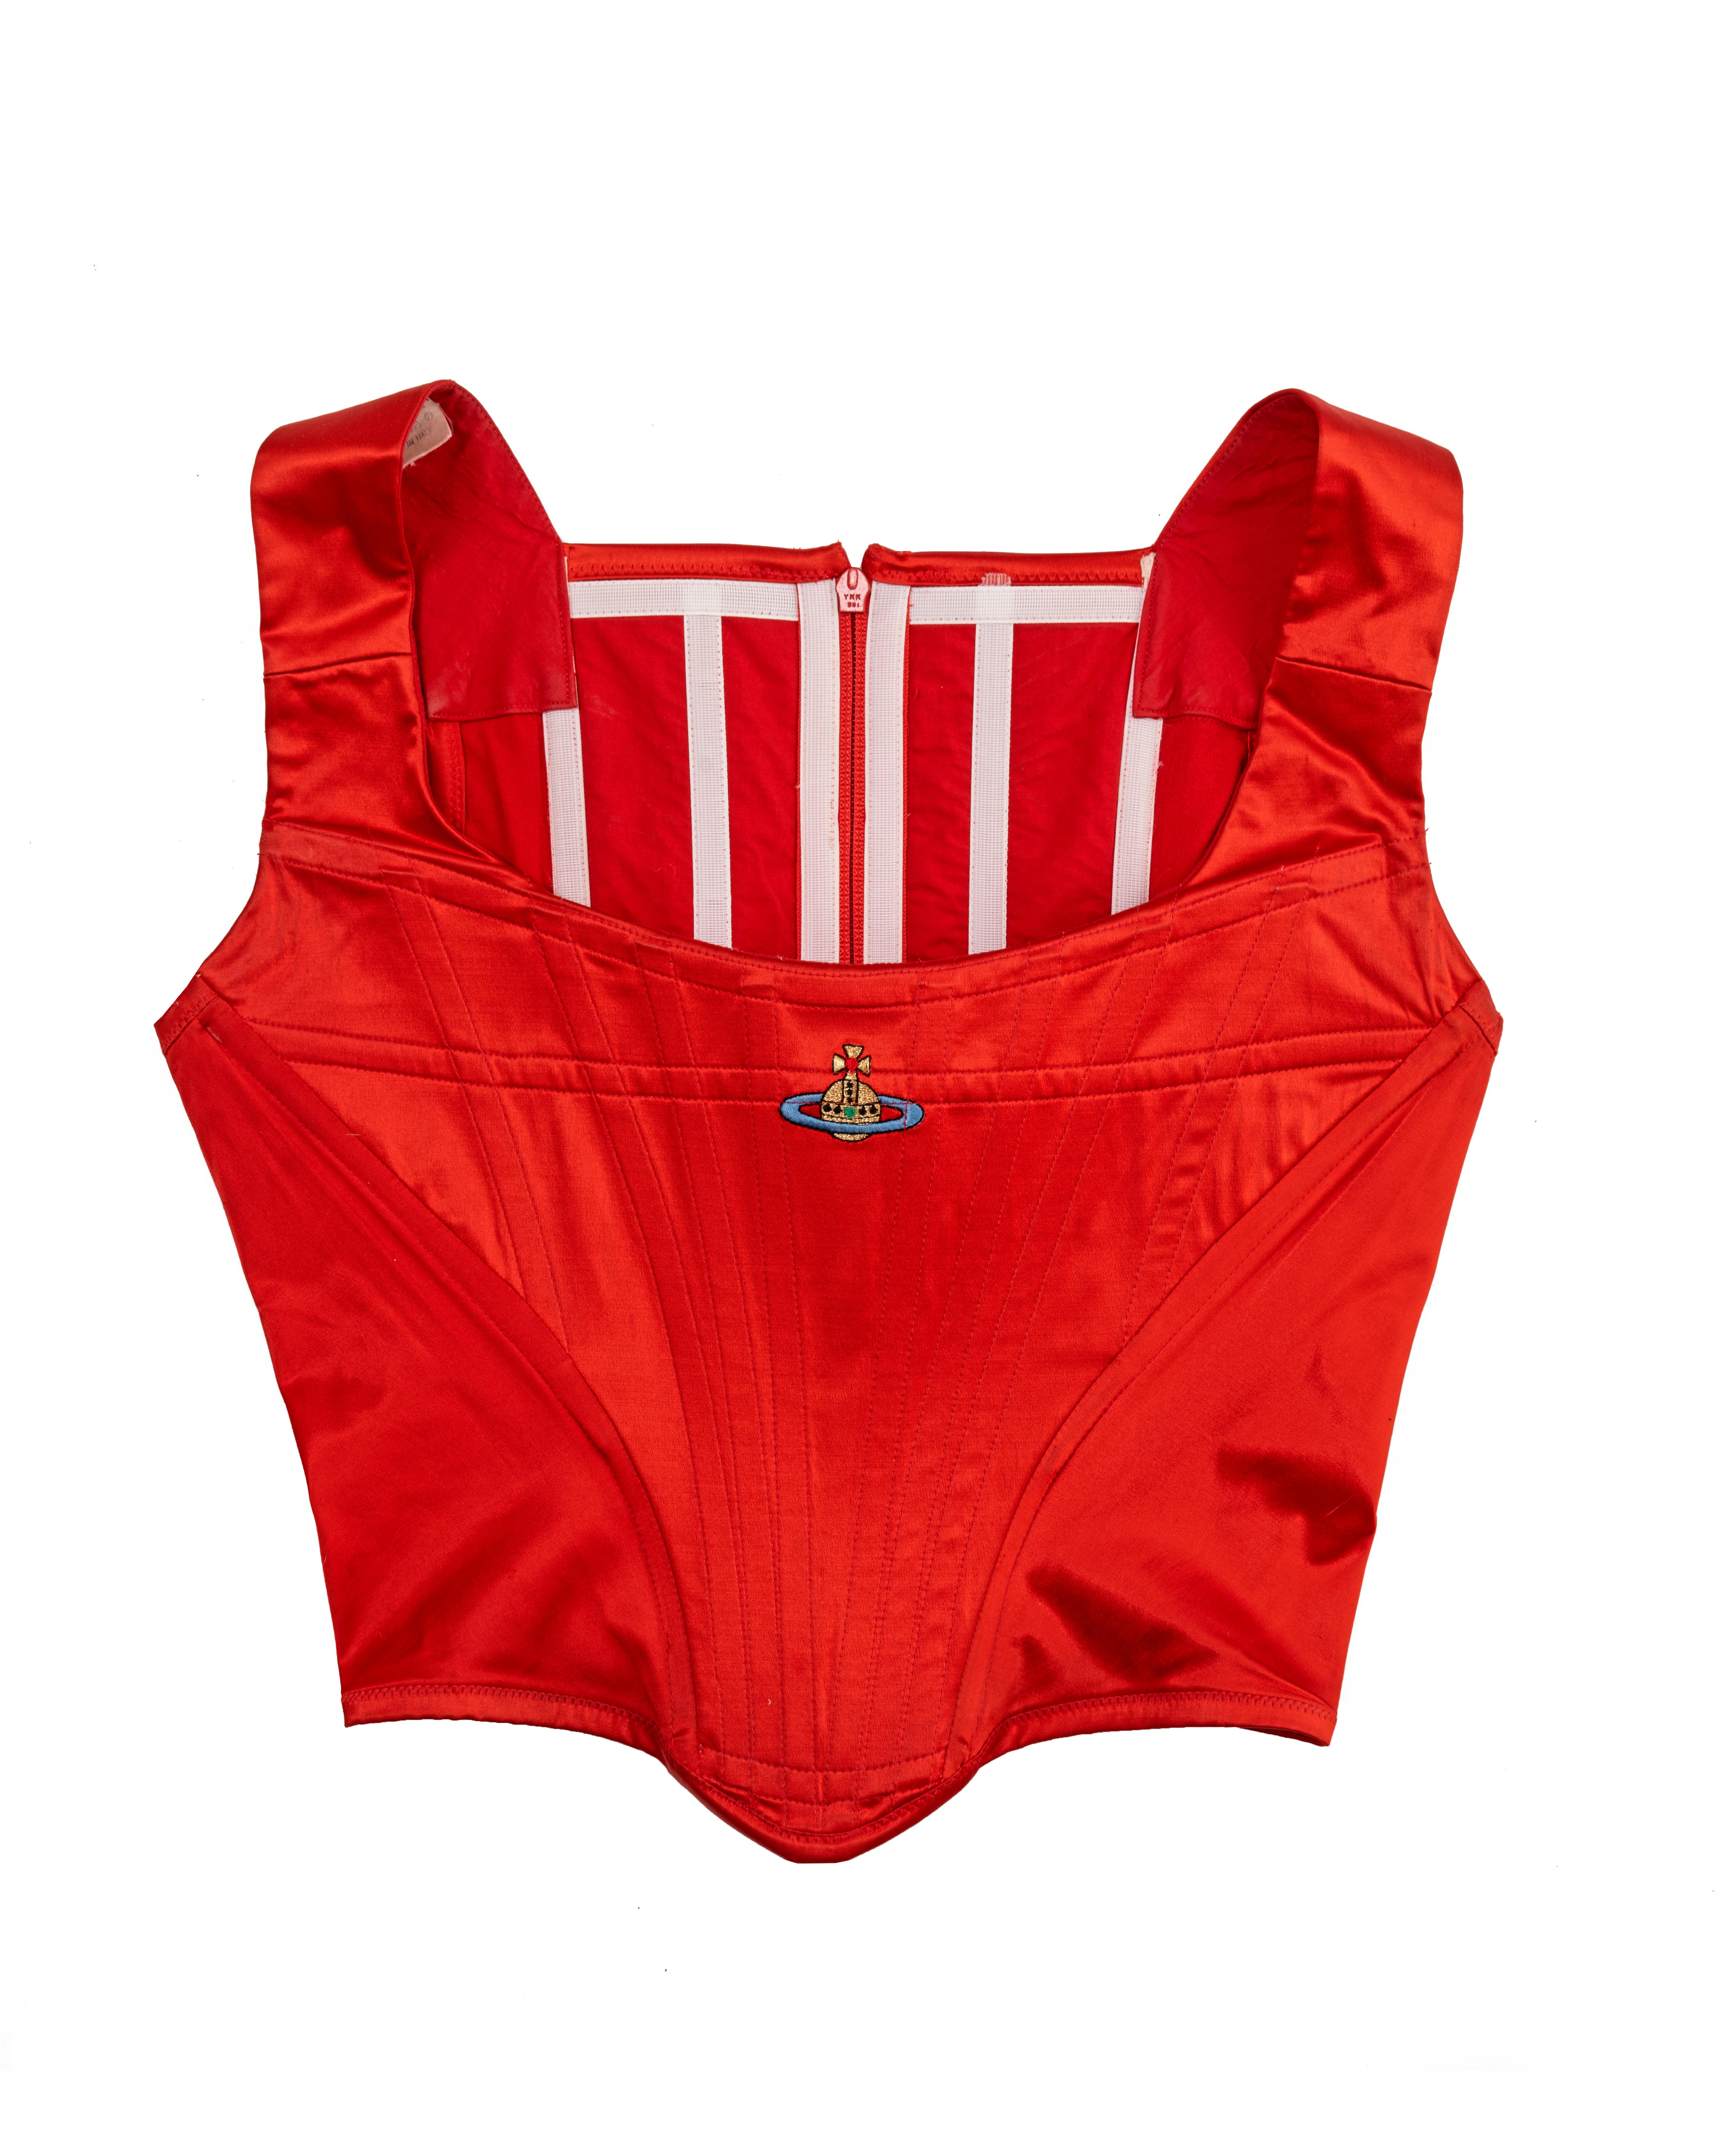 Vivienne Westwood red satin corset with embroidered orb,  c. 1990s For Sale 1